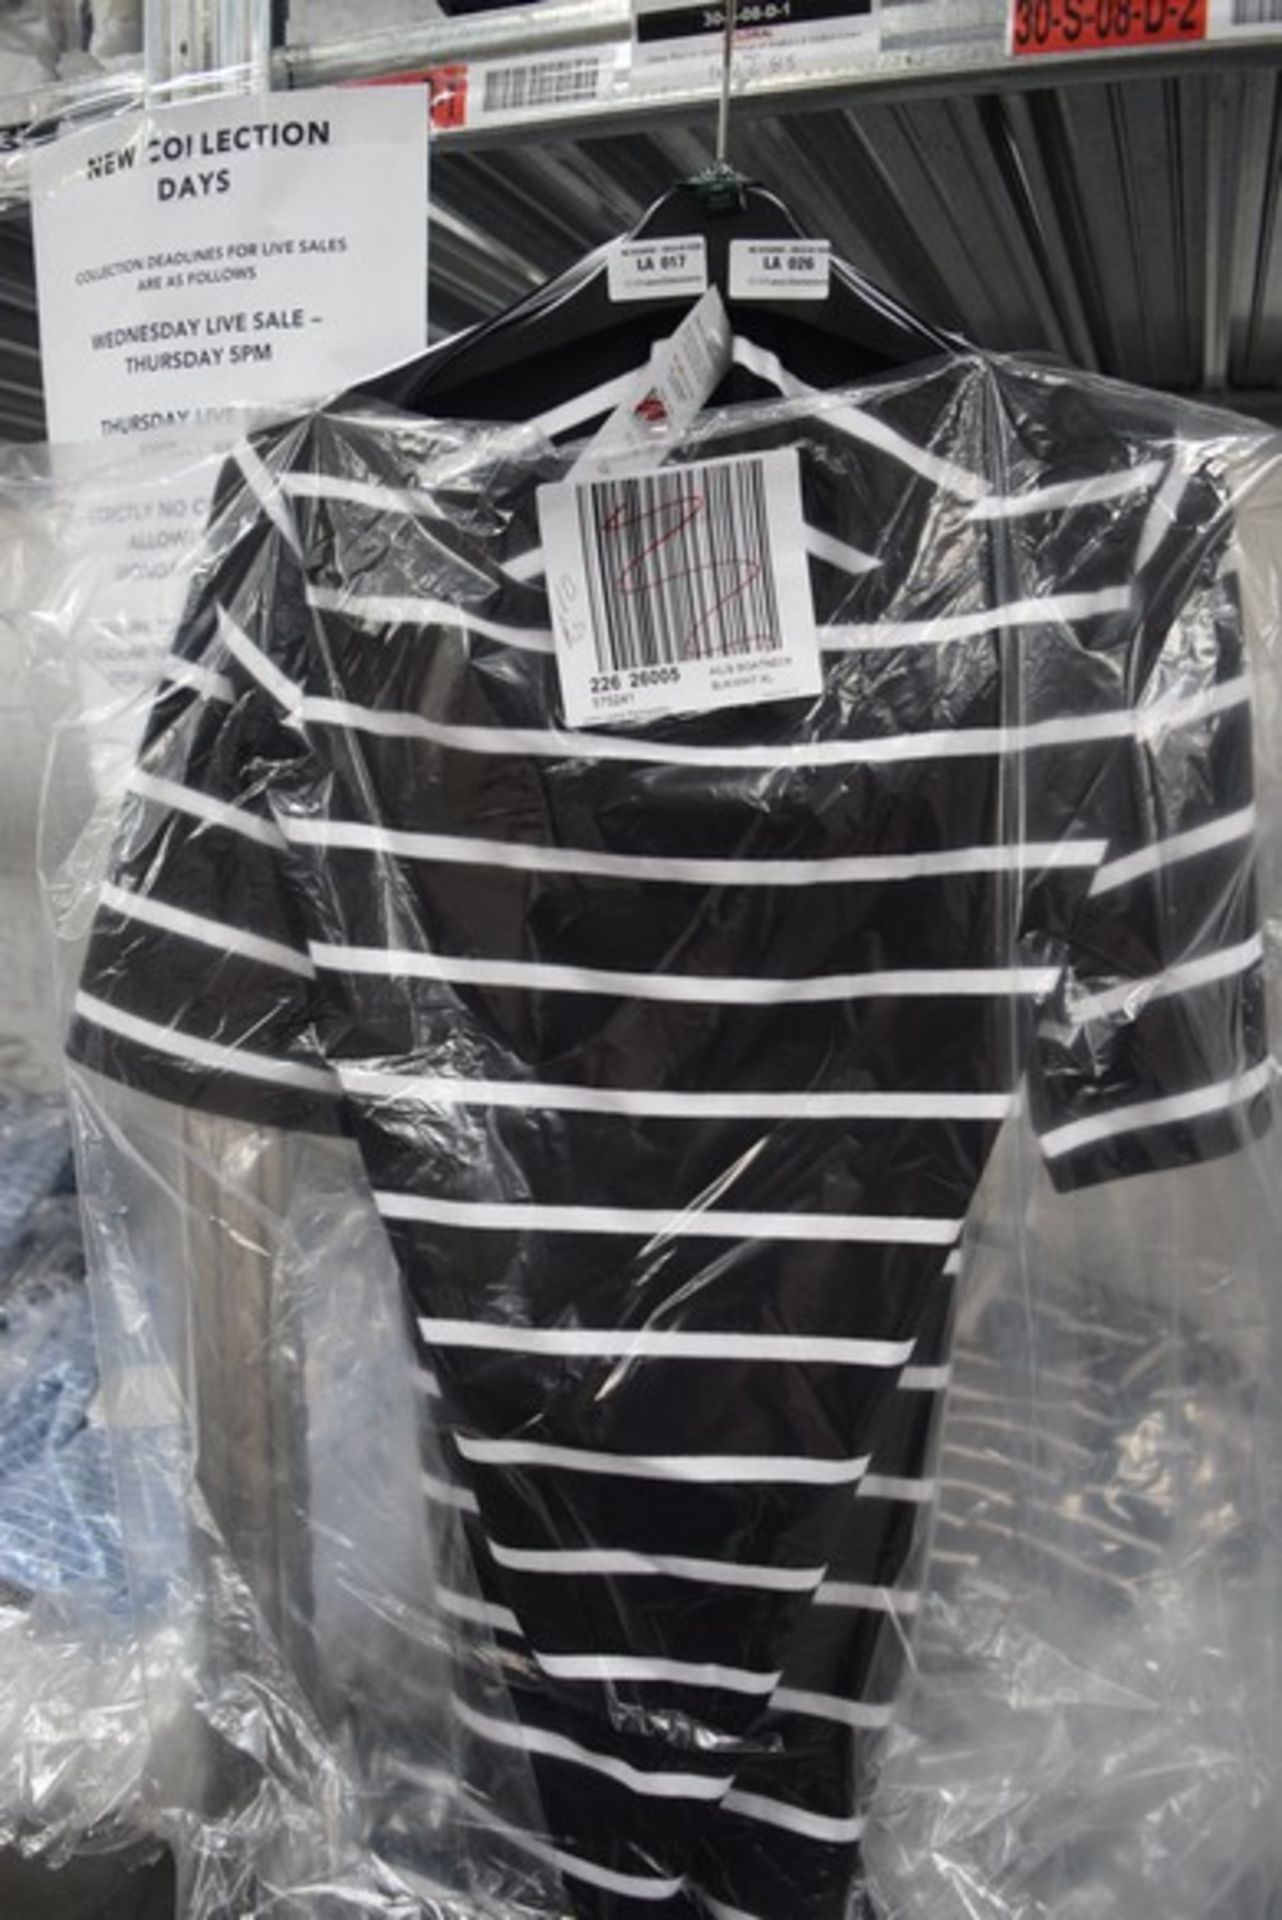 1 x BRAND NEW PACKAGED RALPH LAUREN AILIS BOAT NECK BLACK AND WHITE STRIPE LADIES T-SHIRT SIZE XL